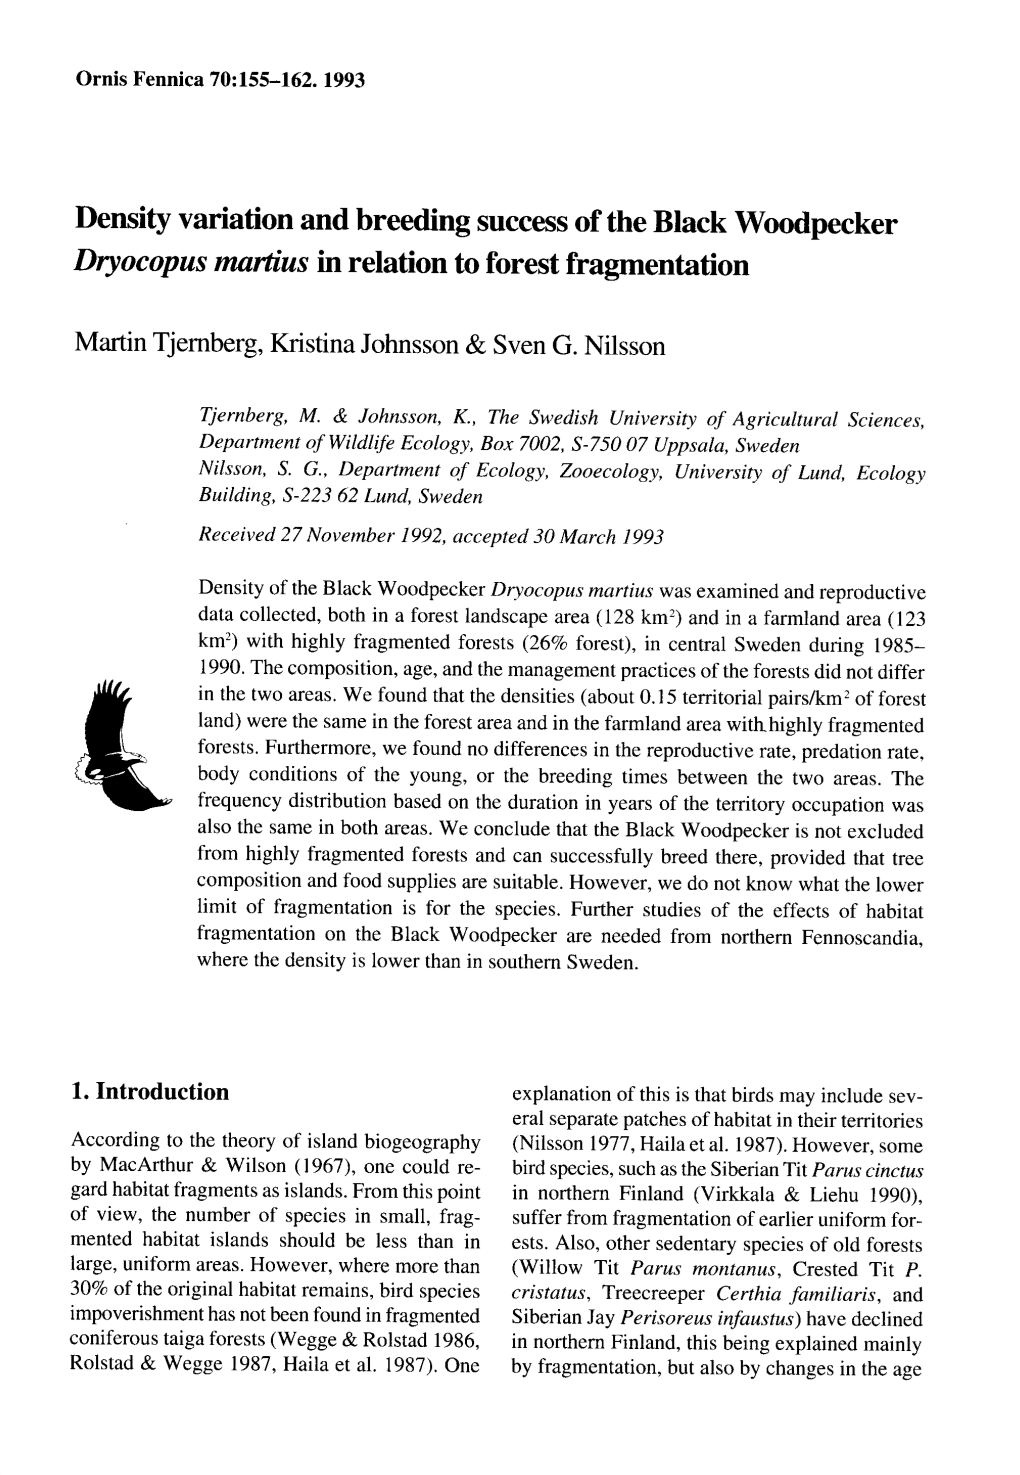 Density Variation and Breeding Success of the Black Woodpecker Dryocopus Martius in Relation to Forest Fragmentation